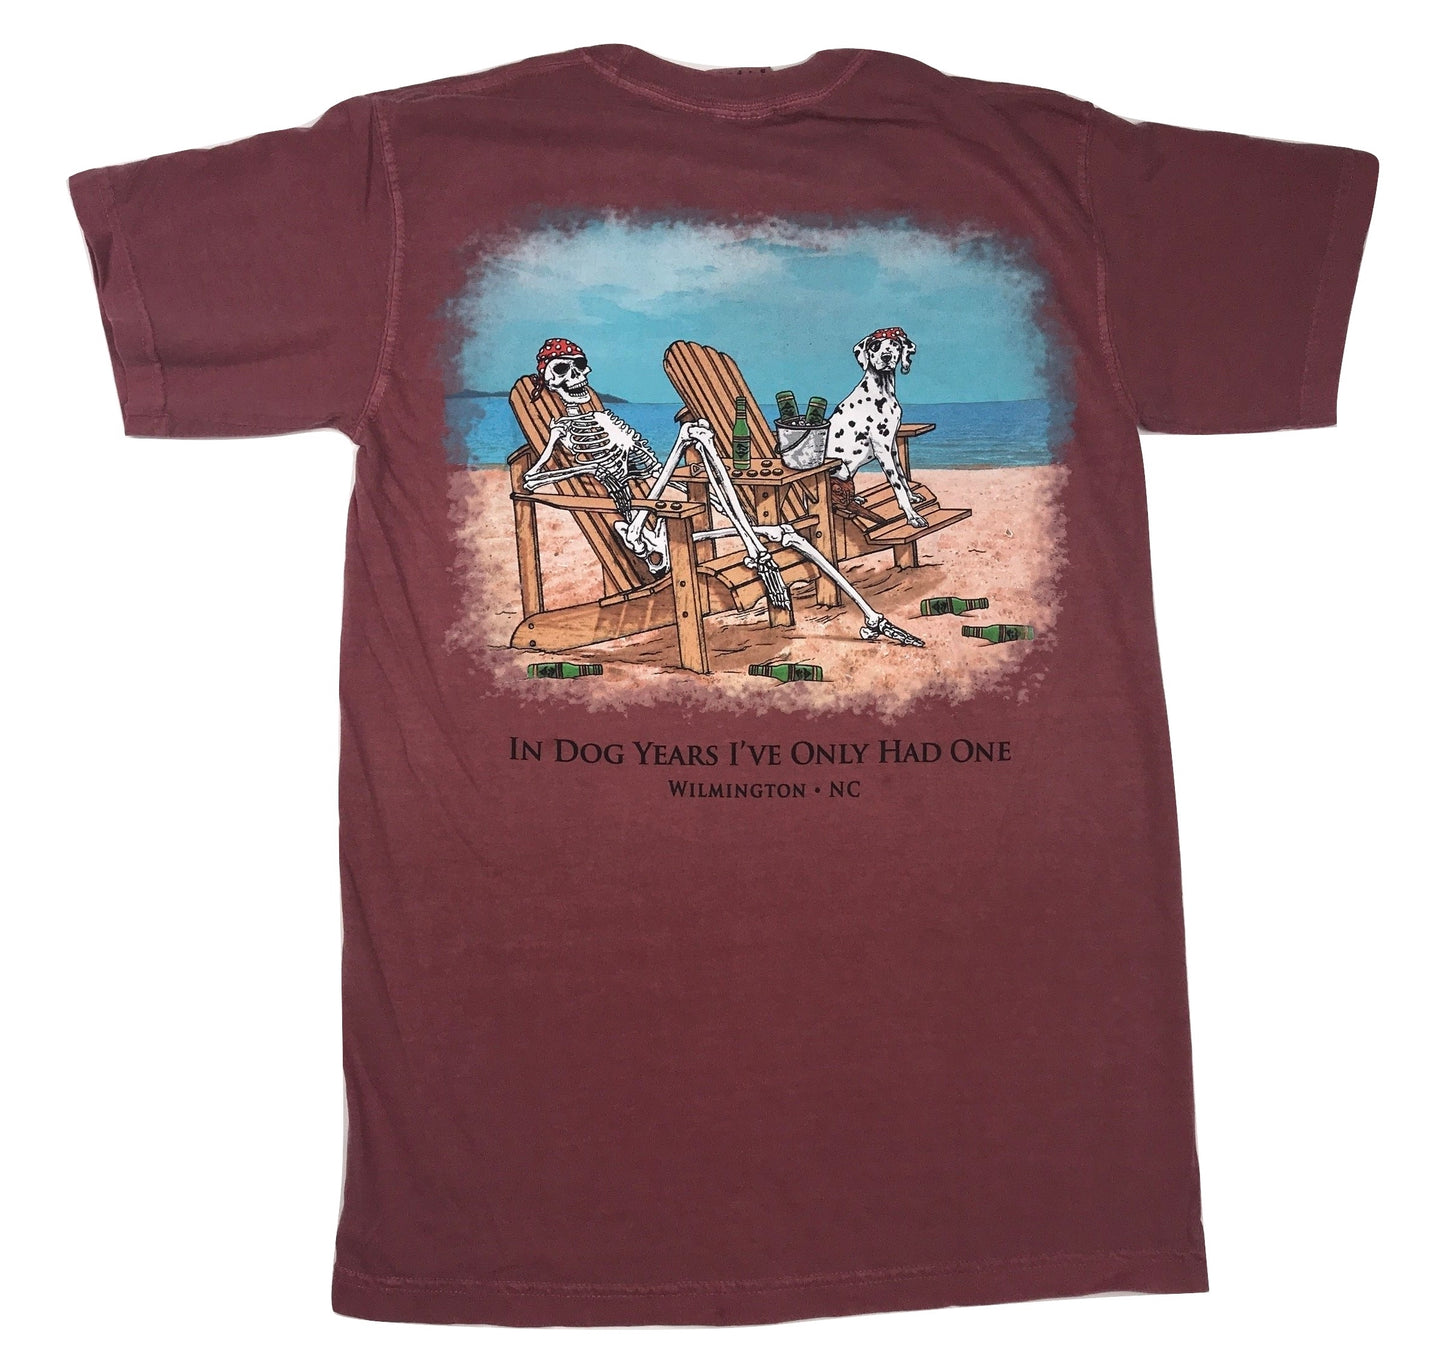 In Dog Years I've Only Had One - Sea Dog T Shirt - Brick